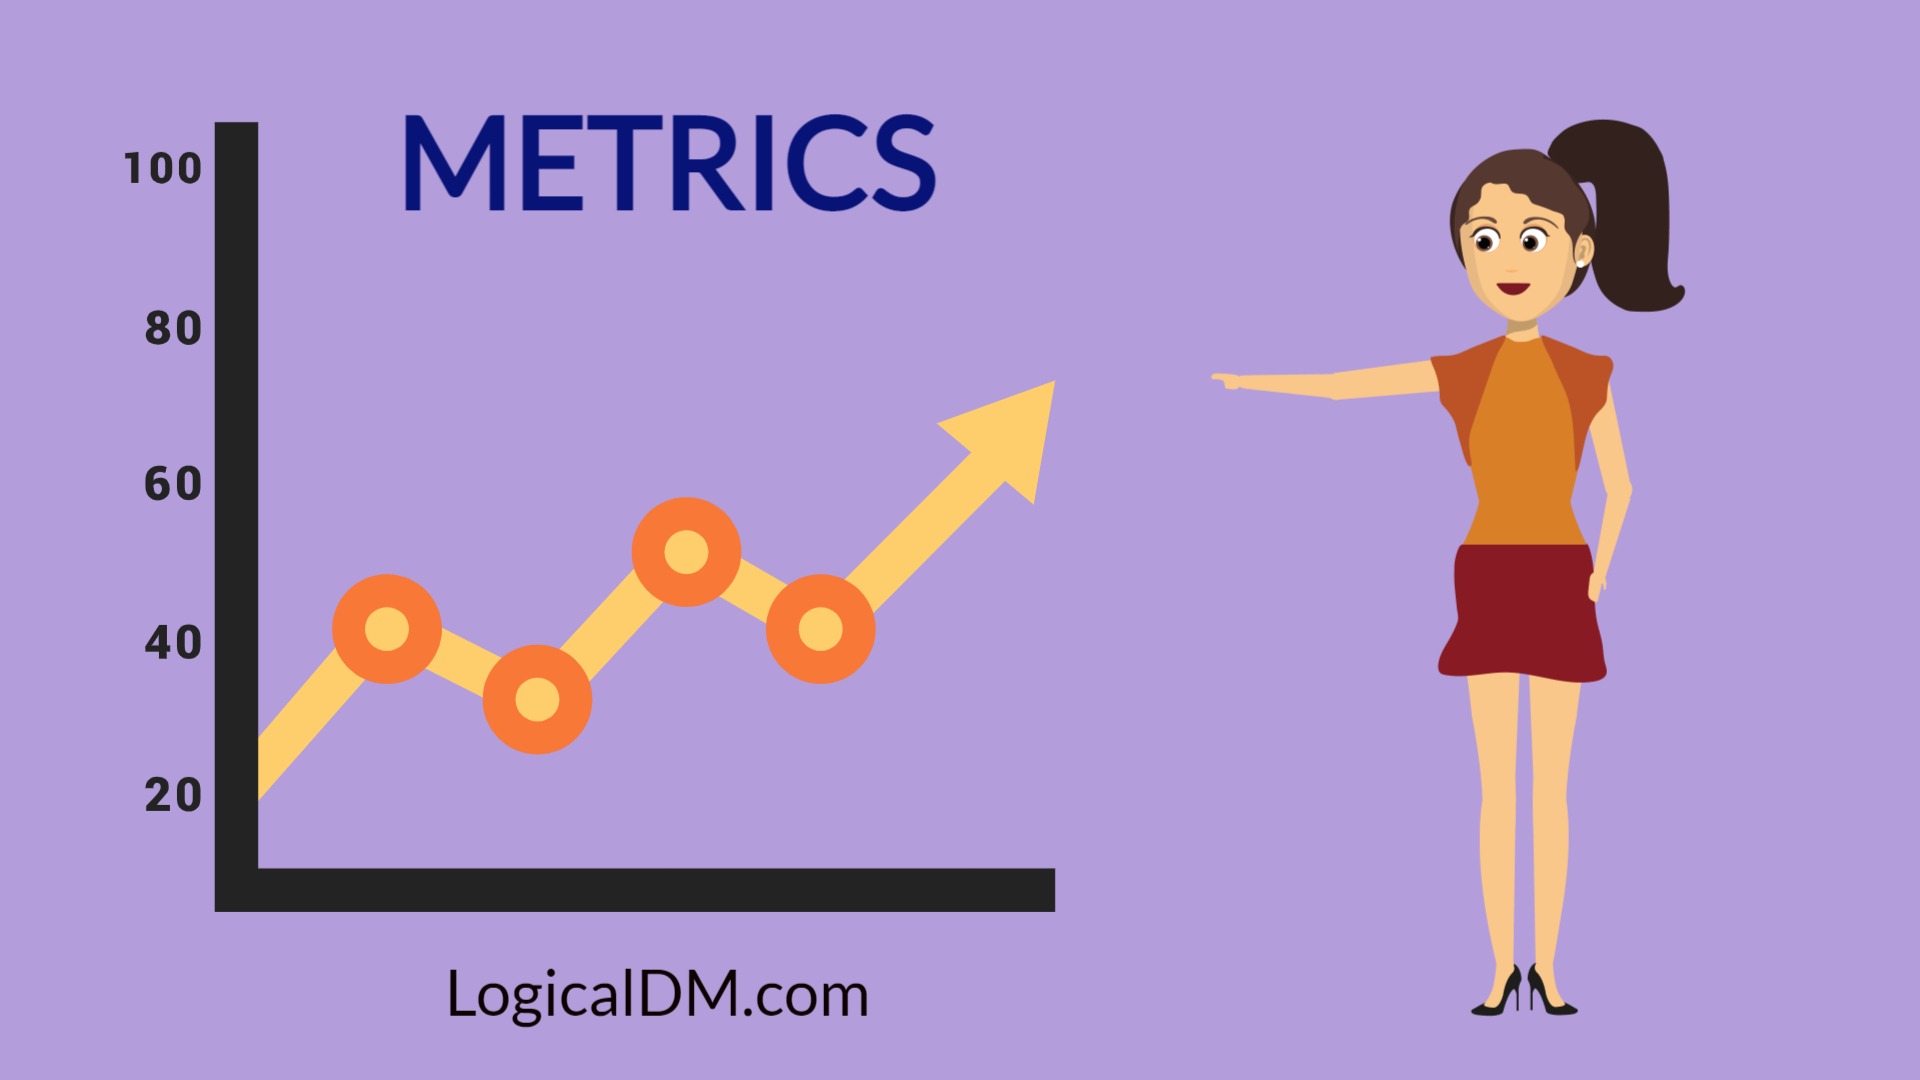 Woman on right pointing at metrics on left